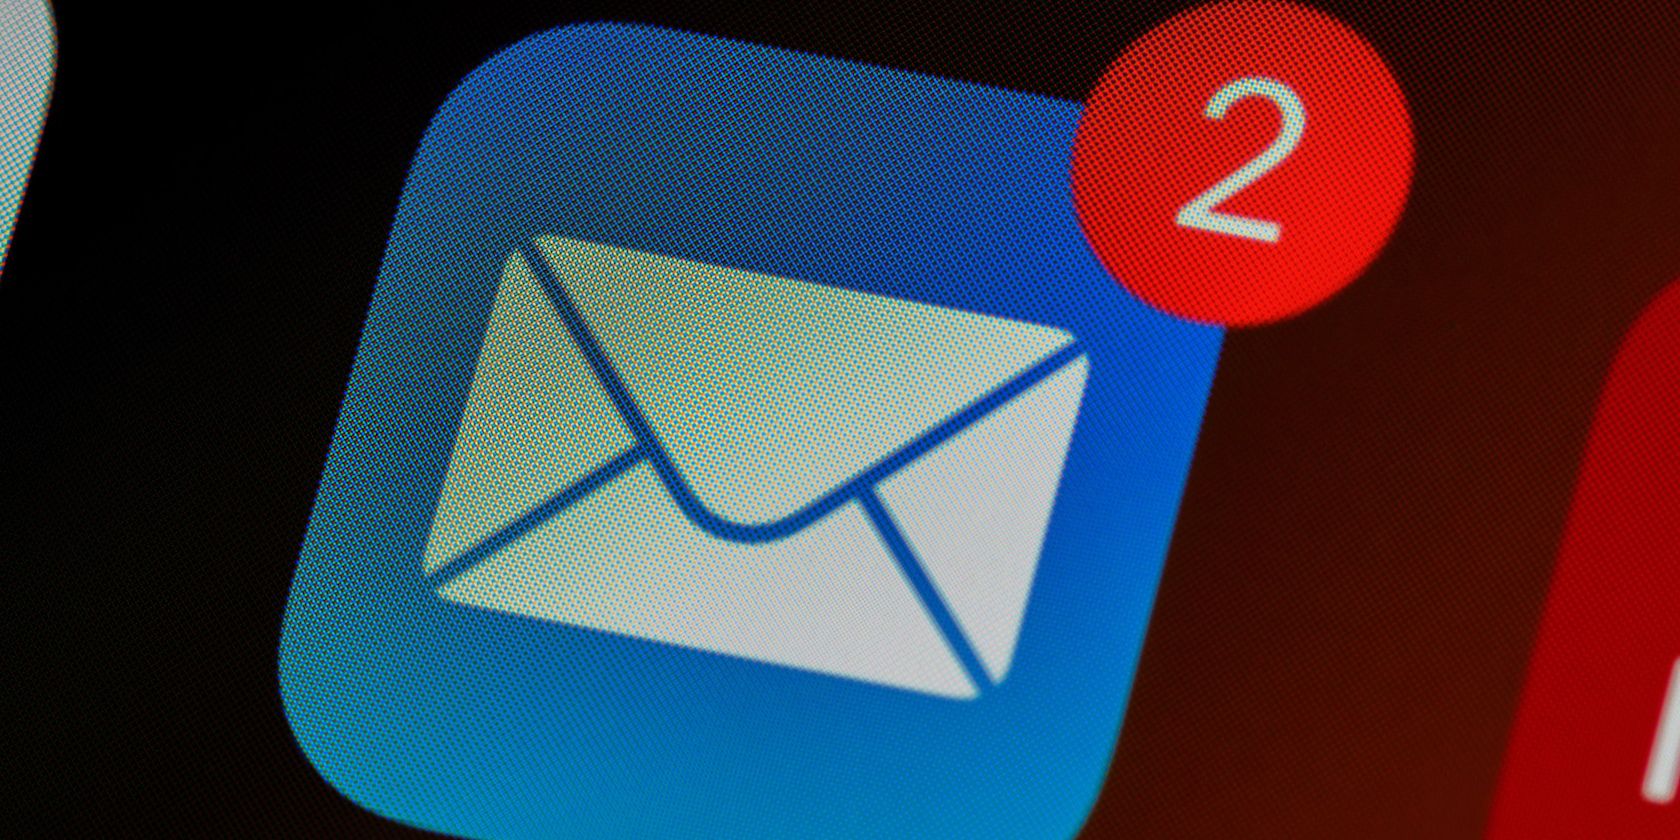 iOS mail app with two new emails